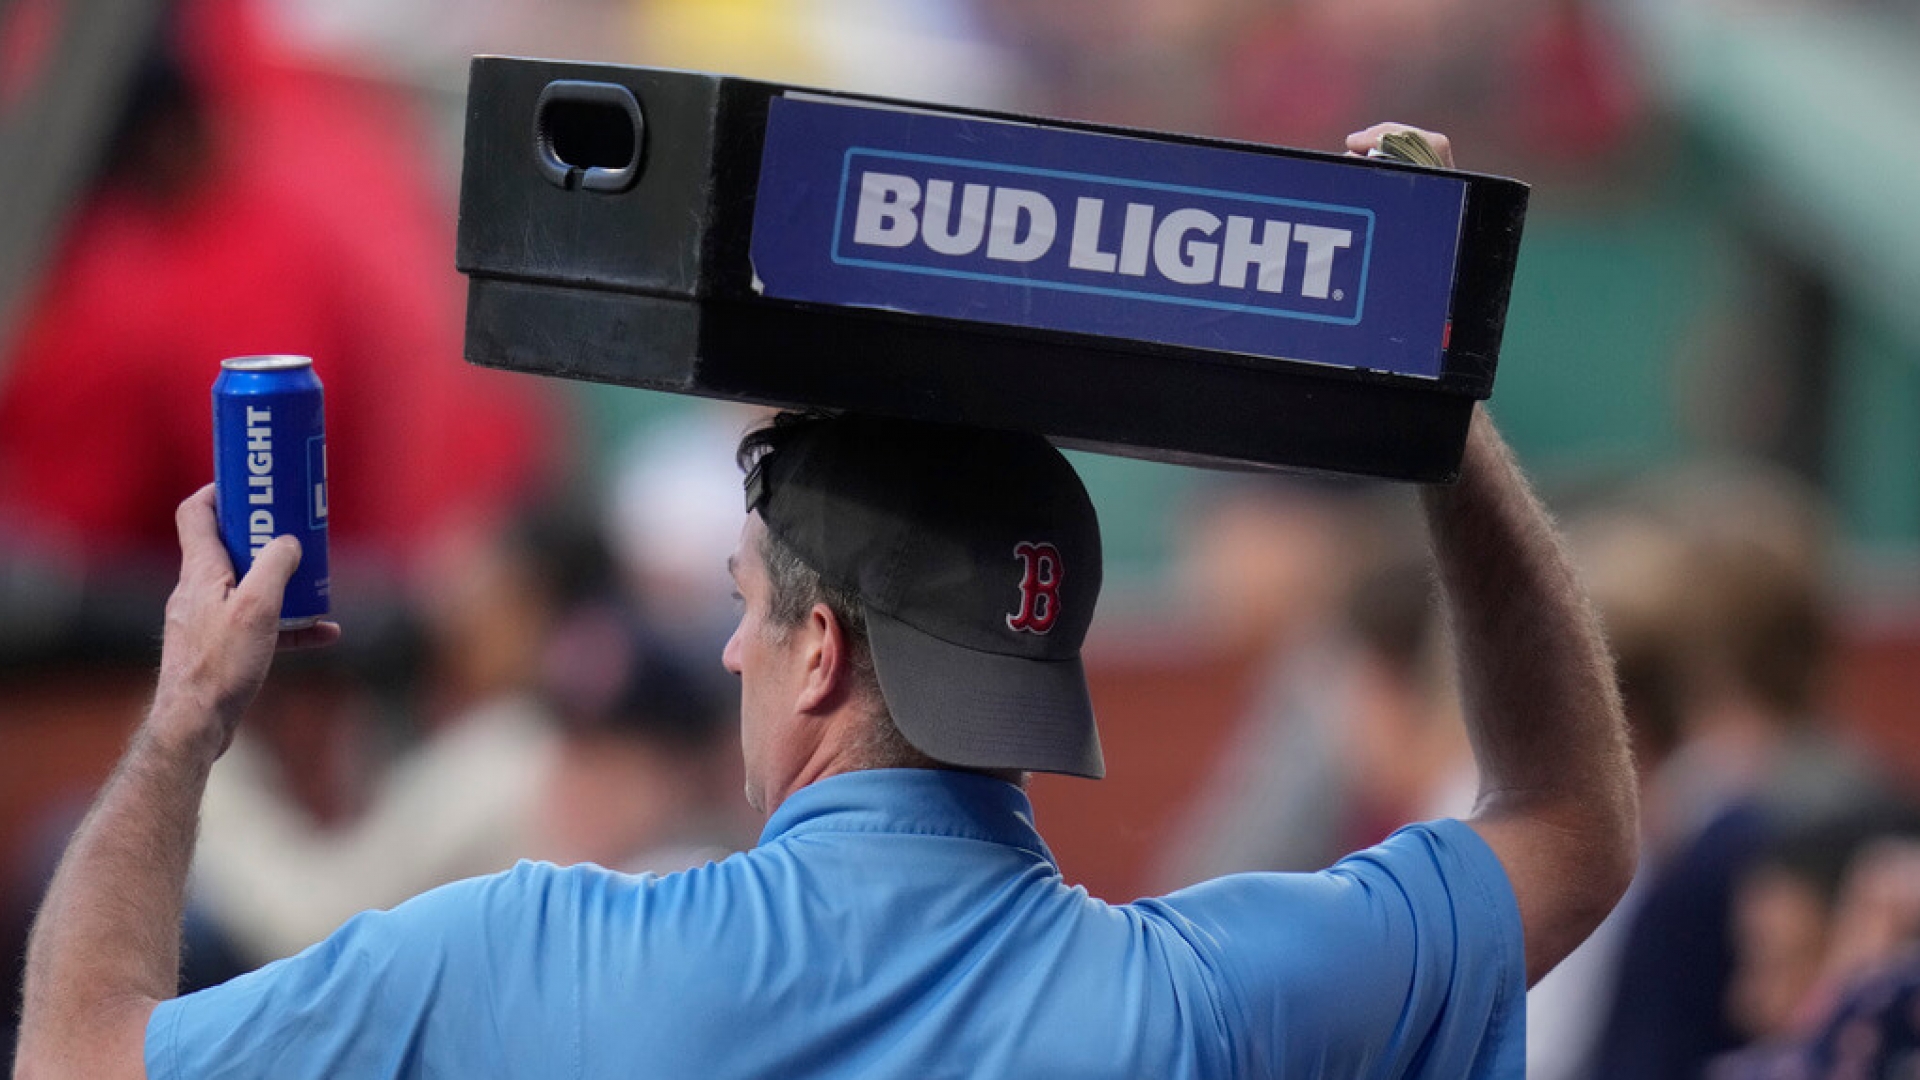 What lessons should brands take away from the 'Bud Light Effect'?